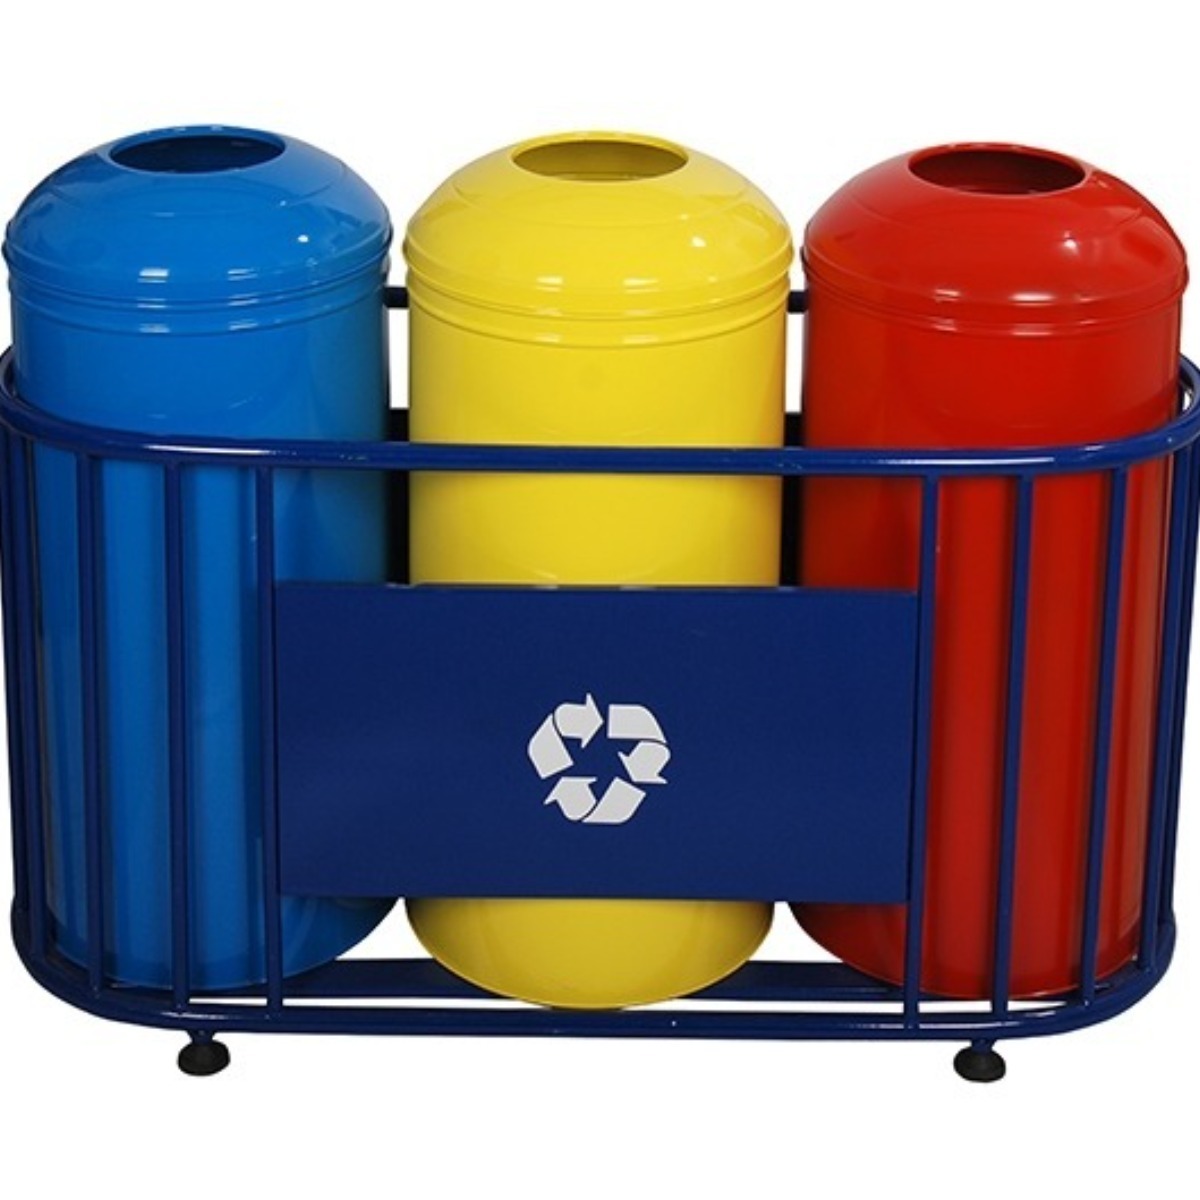 AB-786 3'Part Recycle Bin product logo